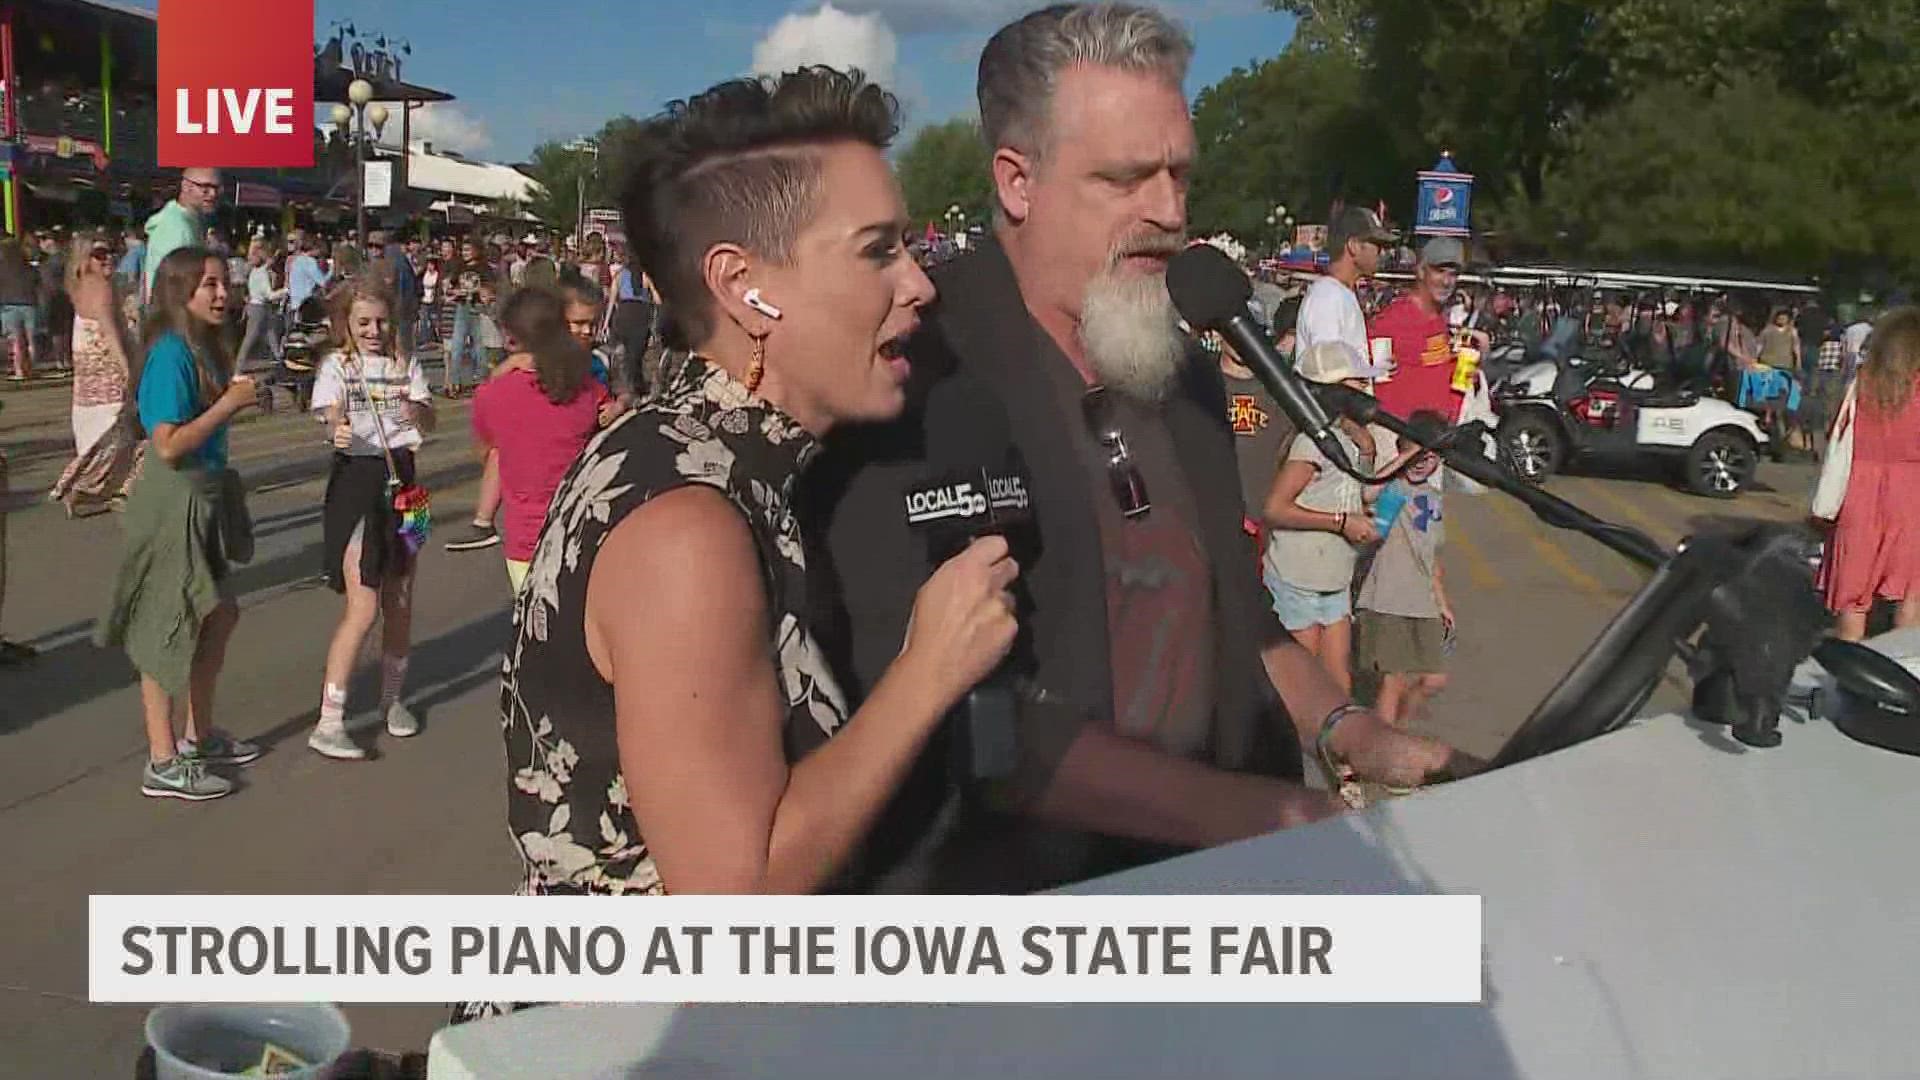 This year is pianist Jim Ripp's first year at the Iowa State Fair, though he has plenty of experience with his Strolling Piano. If you see him, request a song!